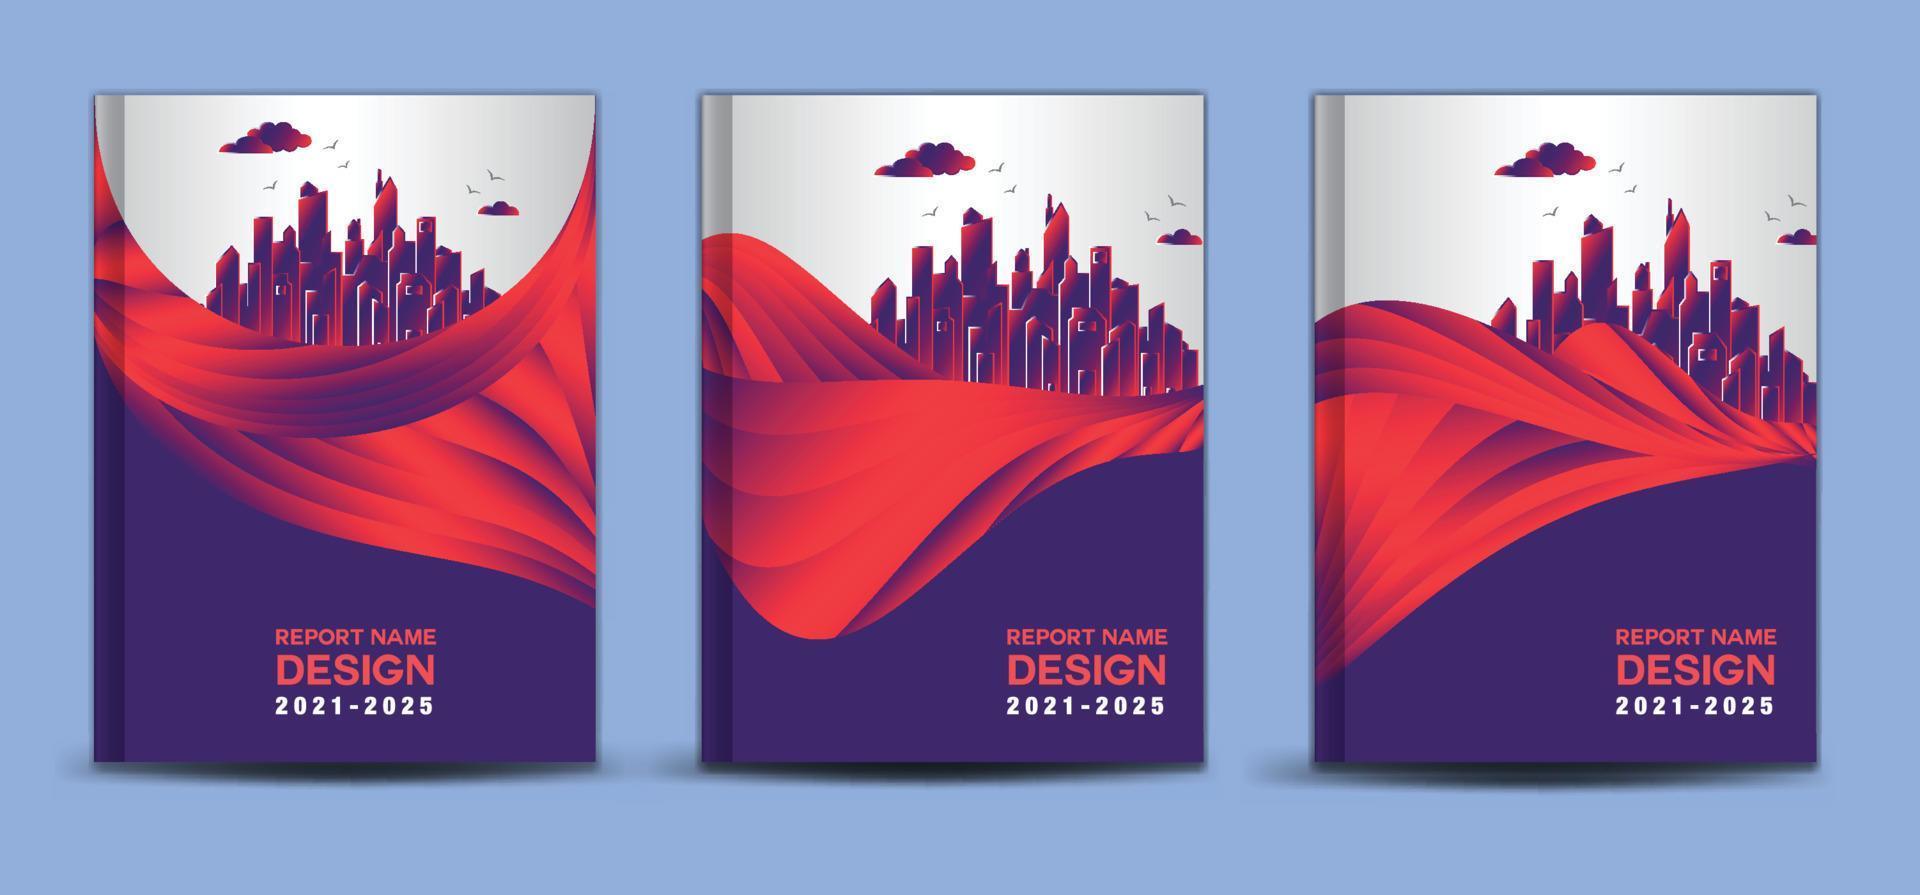 Coporate Cover template set, Annual report 2020-20205, Business brochure flyer template, advertisement, company profile, magazine ads, book, poster, liquid purple abstract background vector, A4 size vector